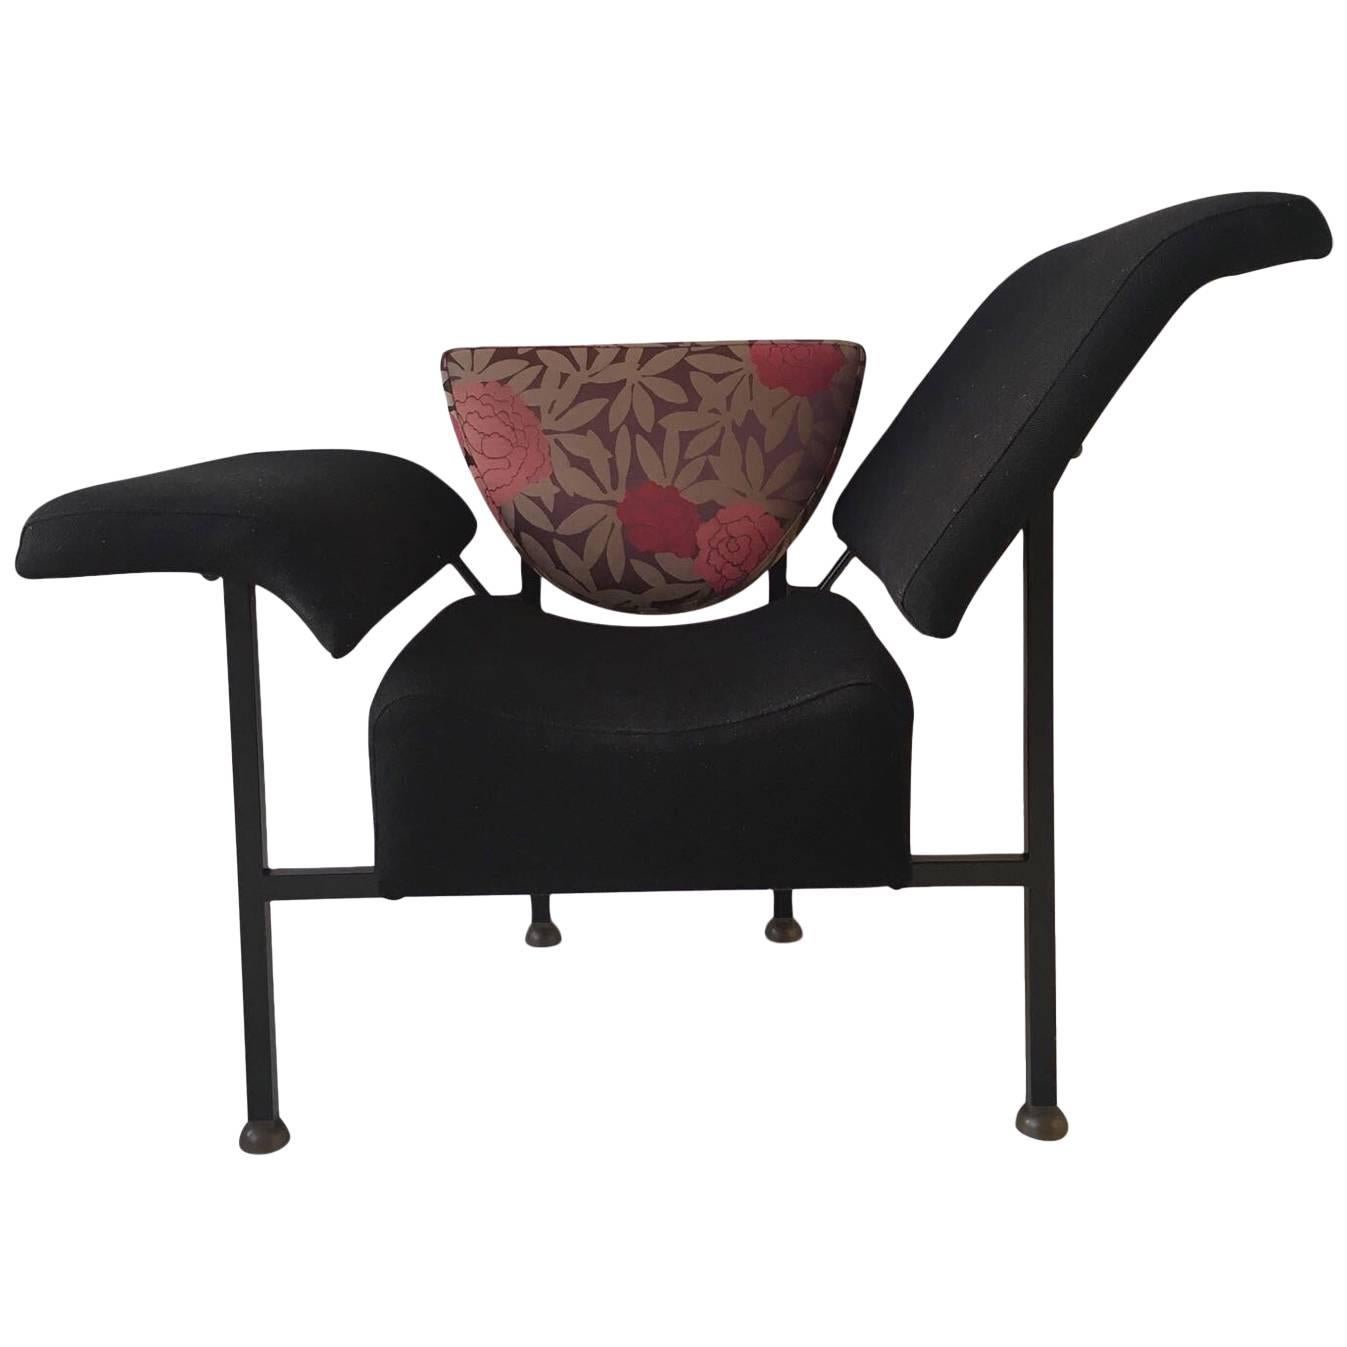 Black Sculptural Easy Chair, 'Greetings from Holland', by Rob Eckhardt, 1980s